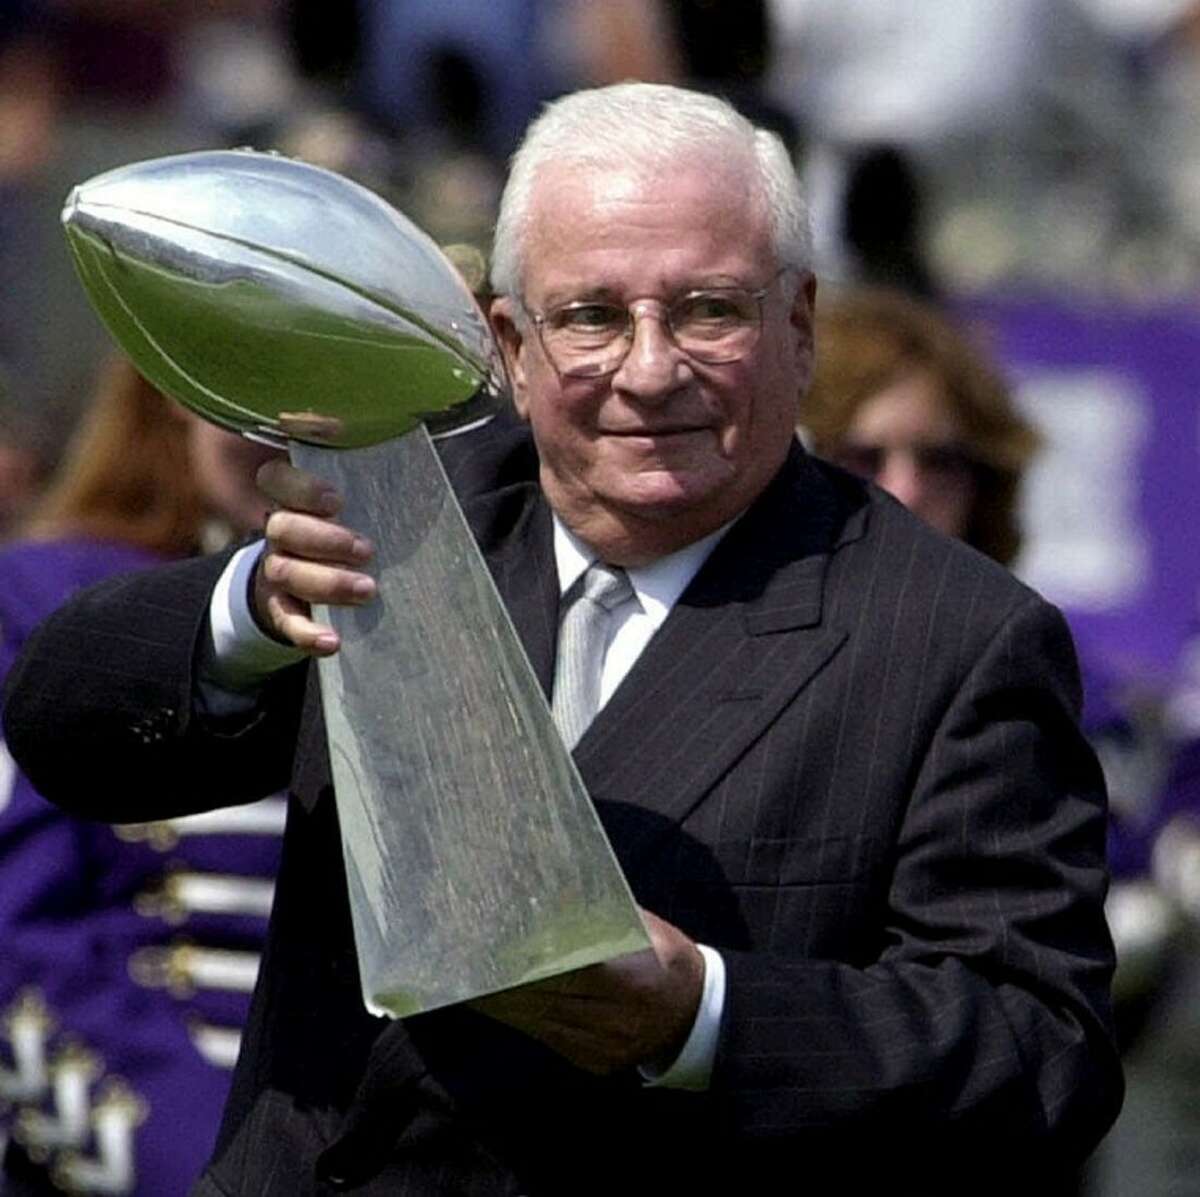 AP photoFormer Baltimore Ravens owner Art Modell died Thursday at the age of 87. His team won the Super Bowl in 2001.